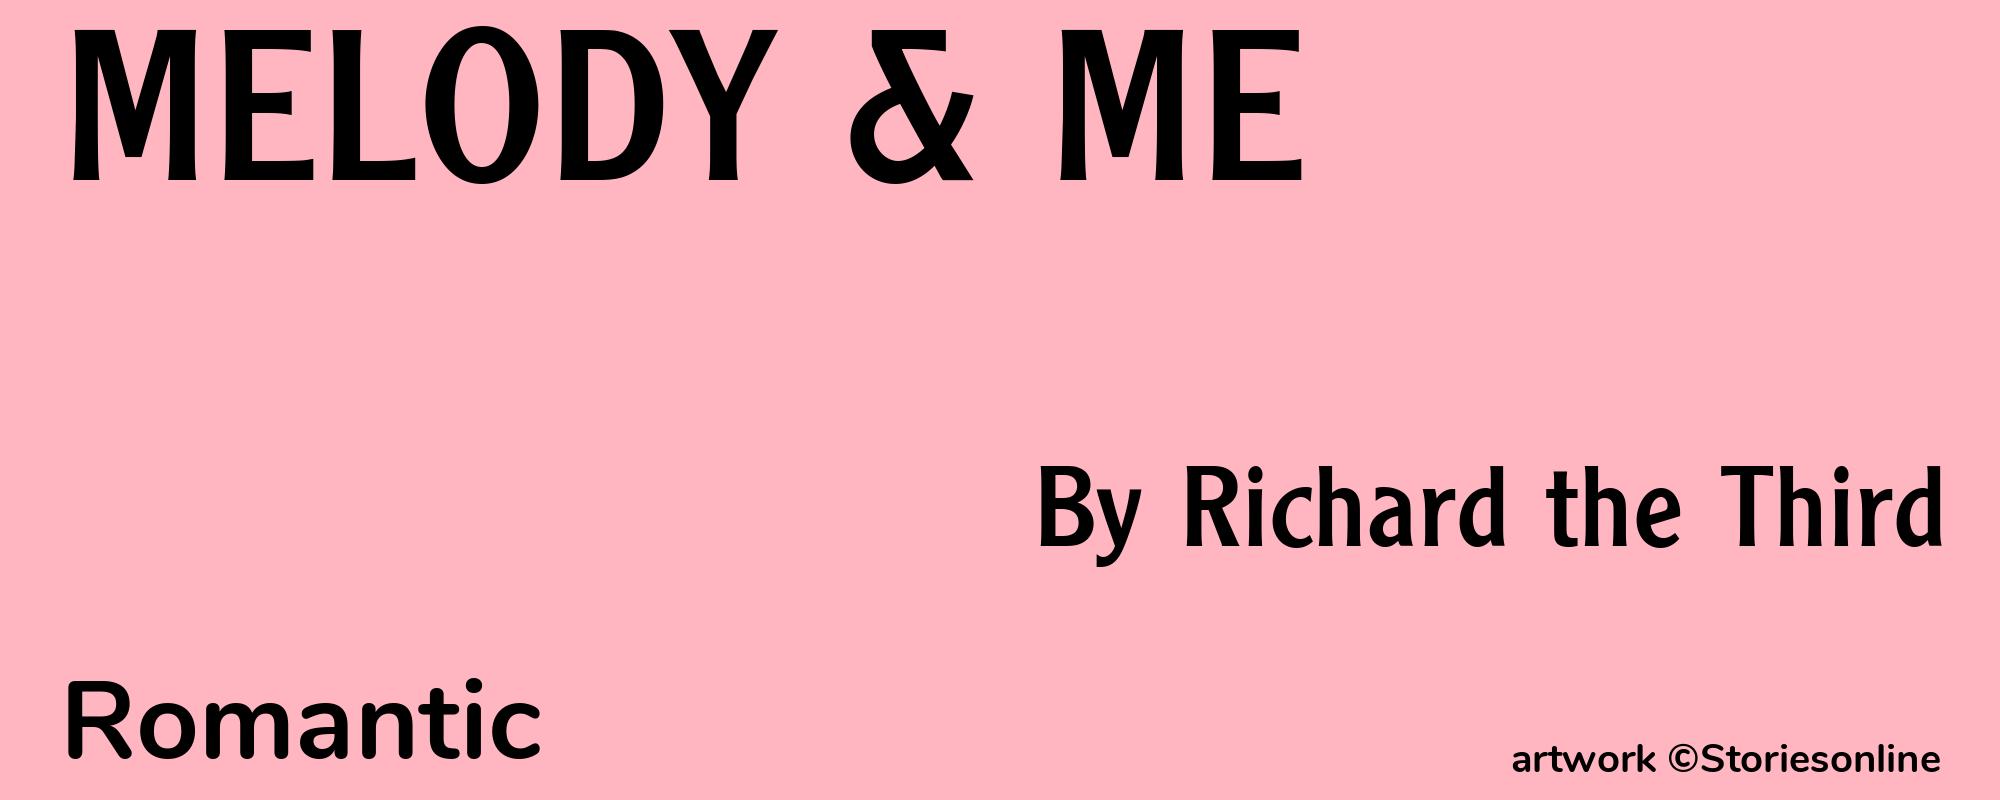 MELODY & ME - Cover